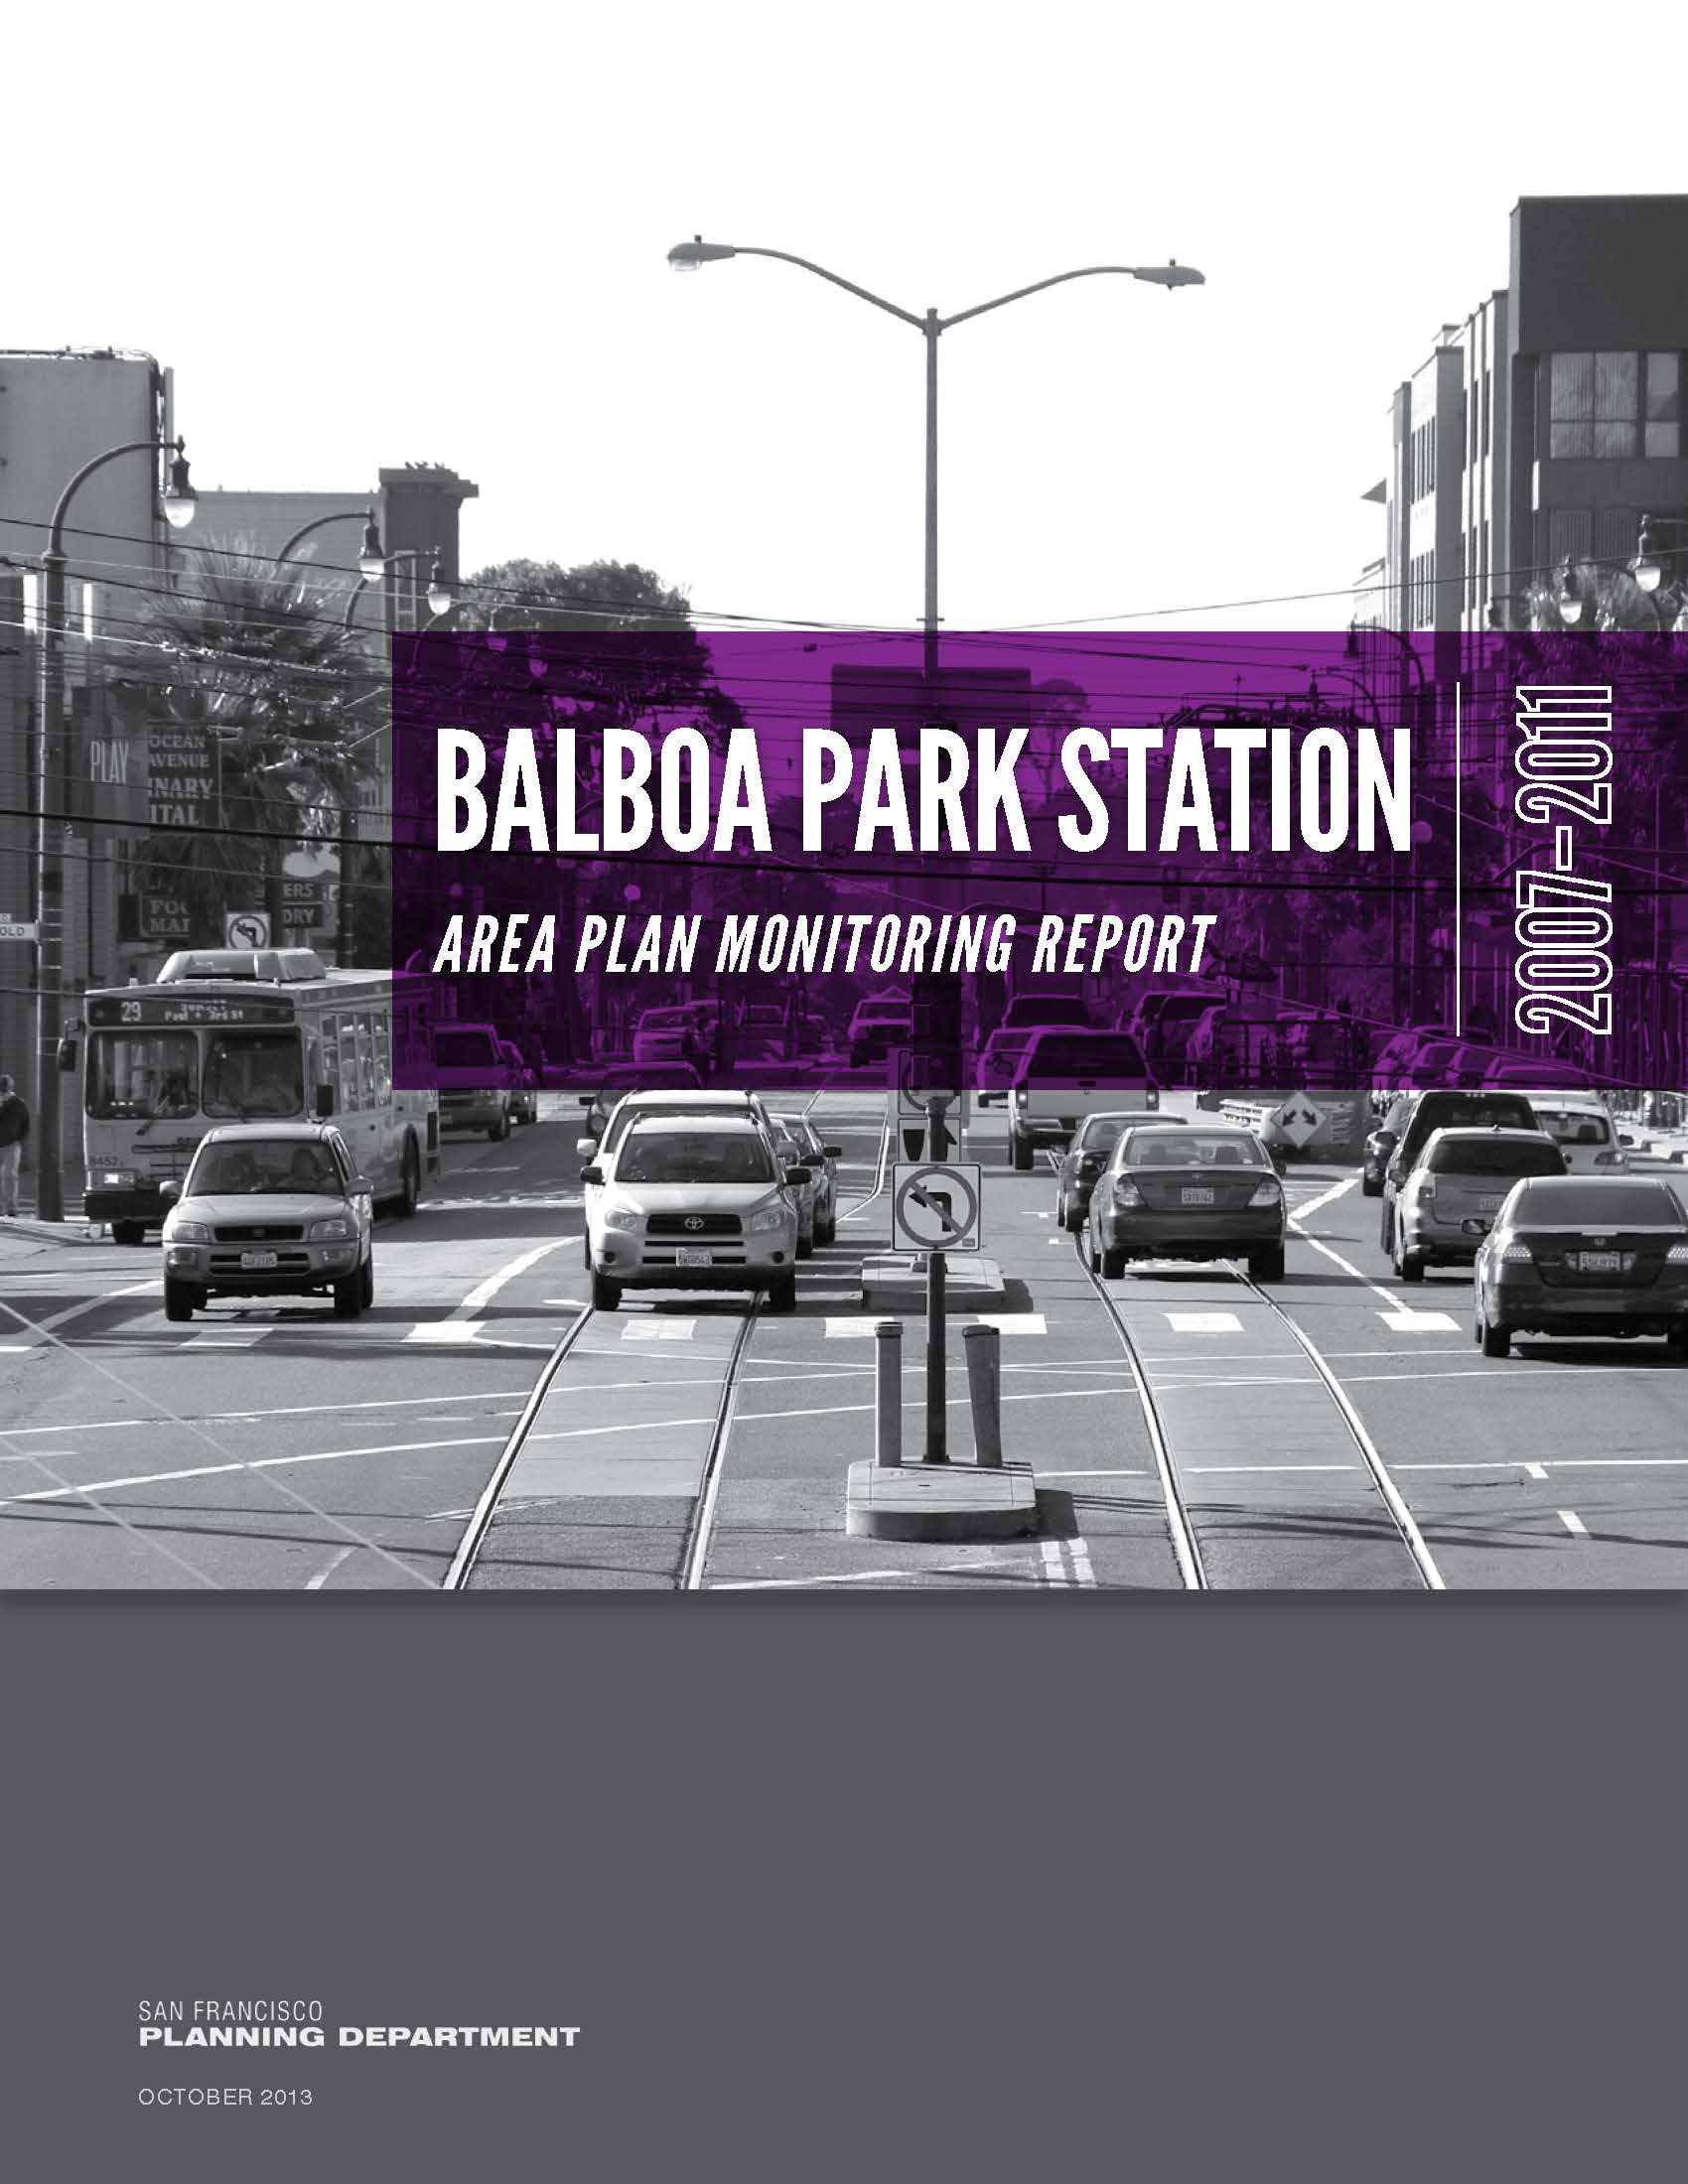 Cover Image for the Balboa Park Station Area Plan Monitoring Report